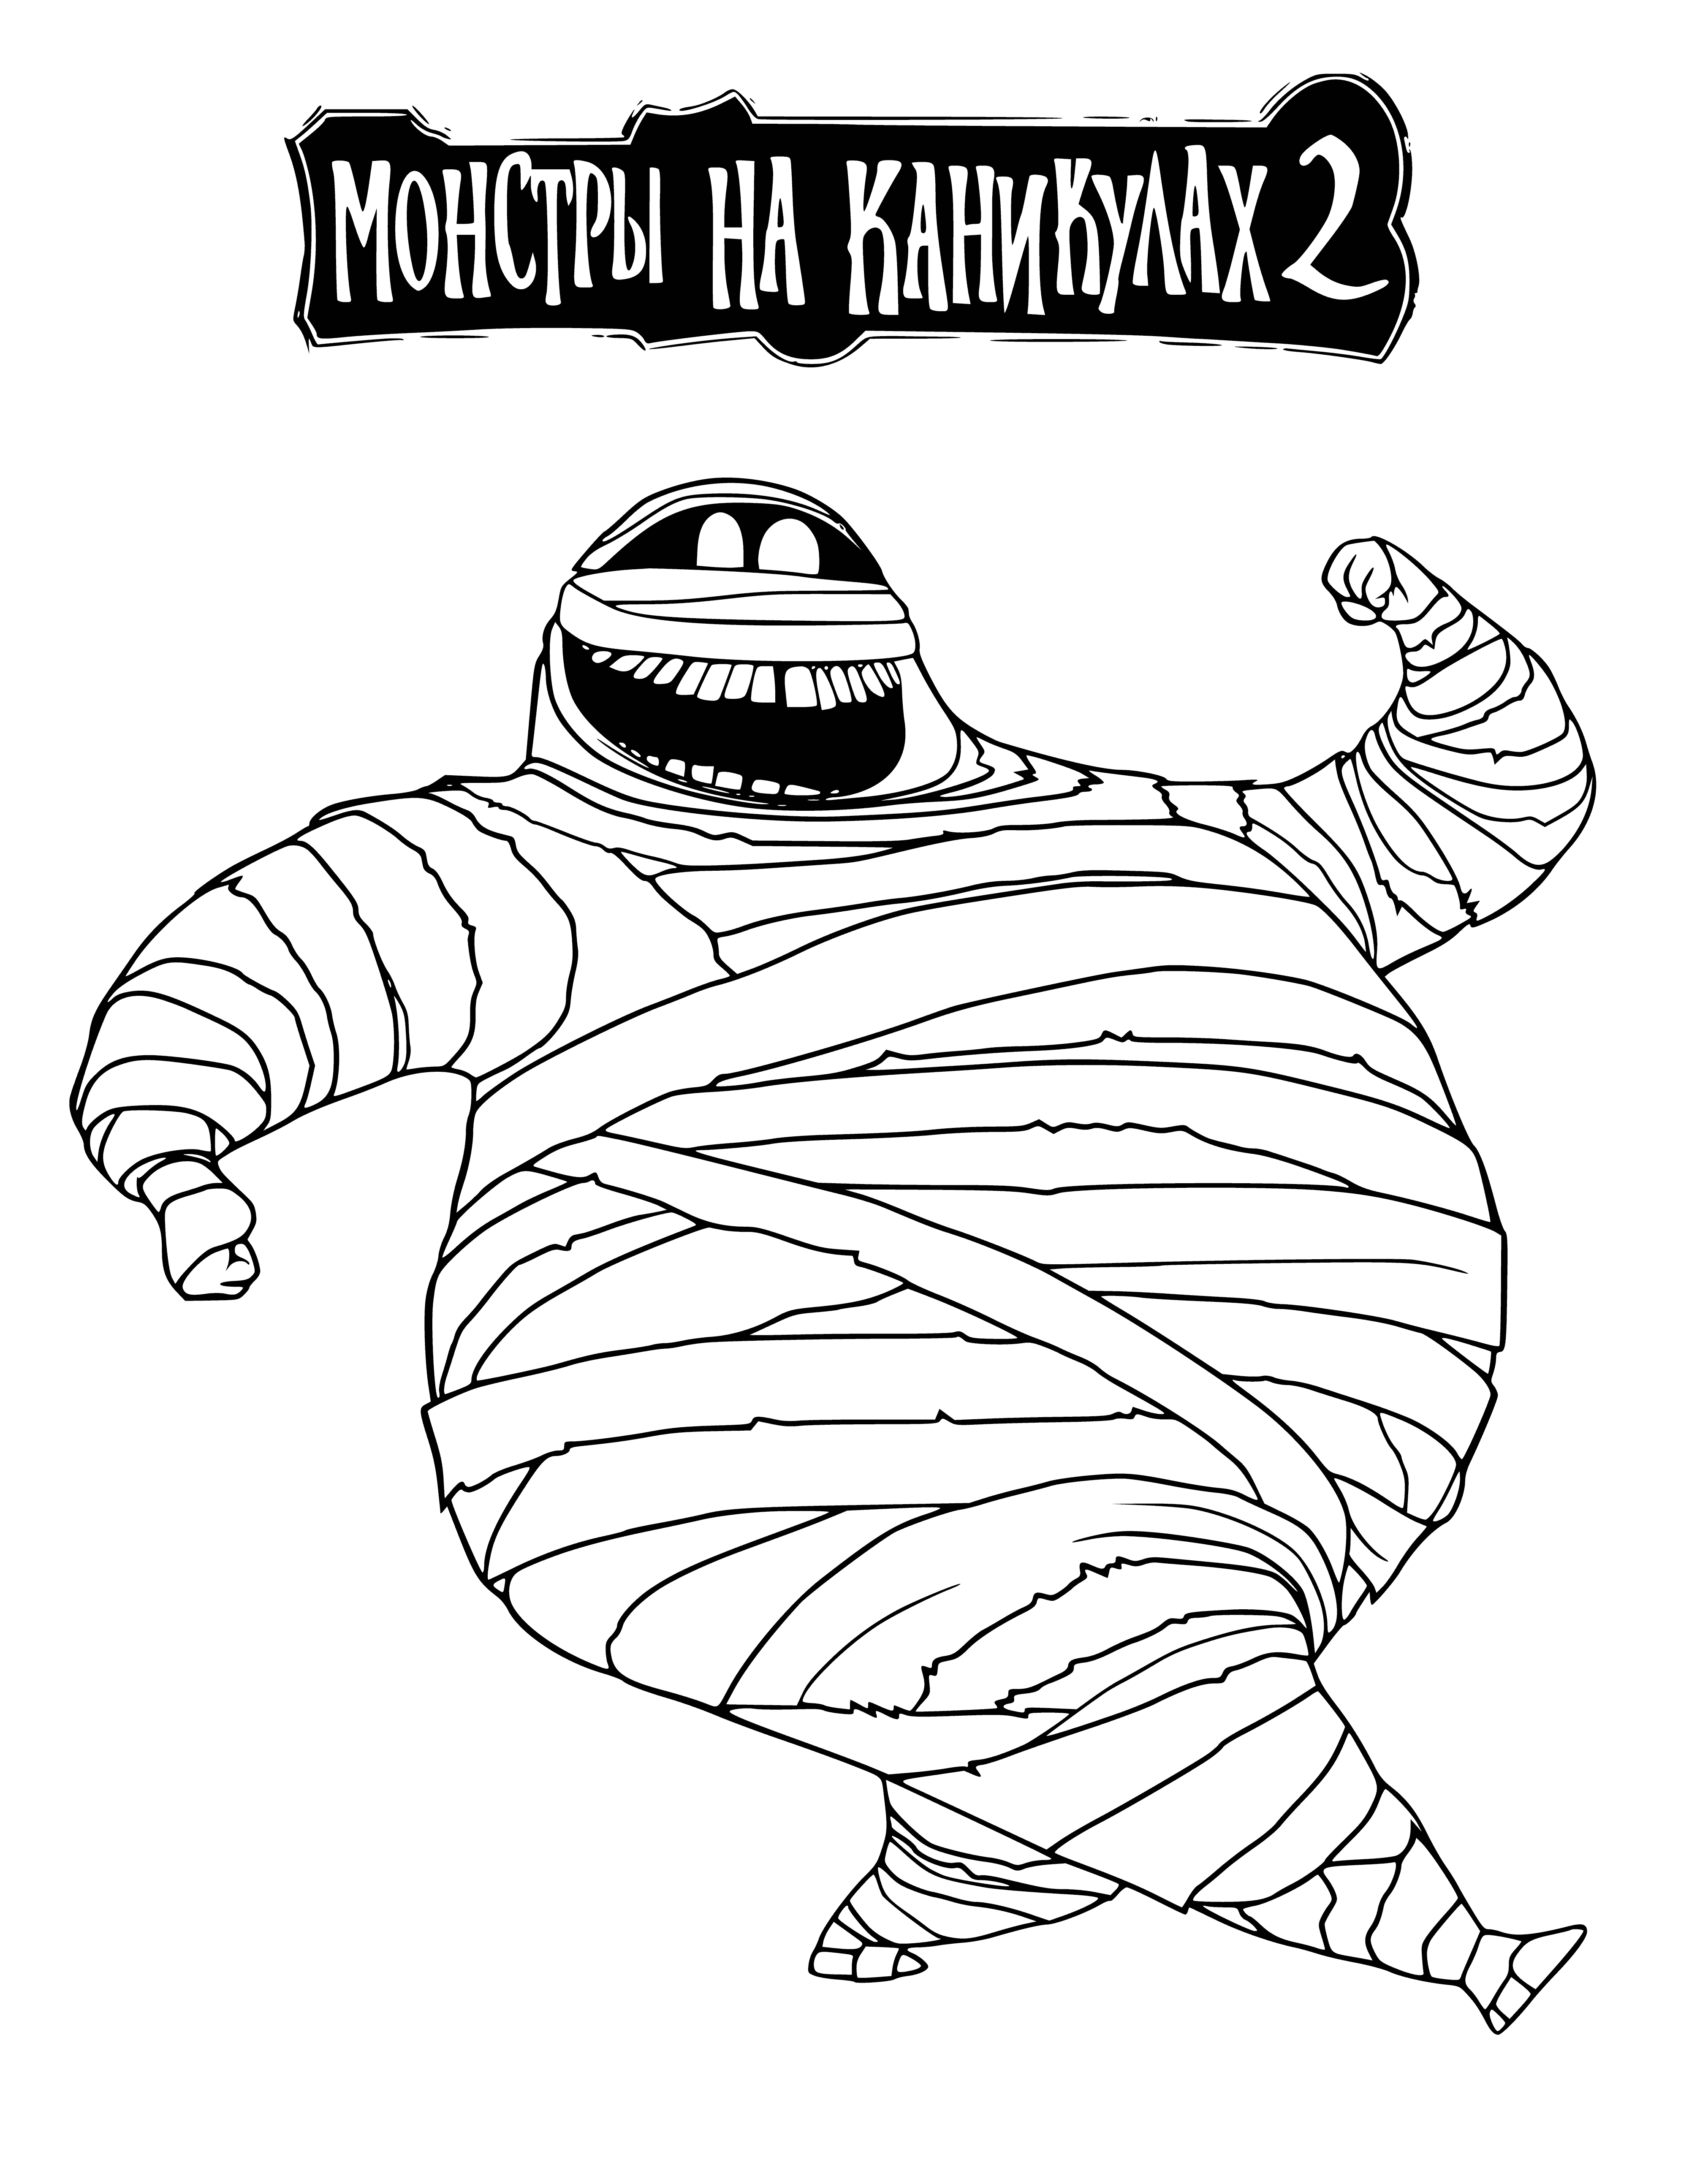 coloring page: Hotel Transylvania coloring page: Black background w/ white text & a spiral in the center surrounded by 4 green ghosts & a purple mummy with a white bandage.